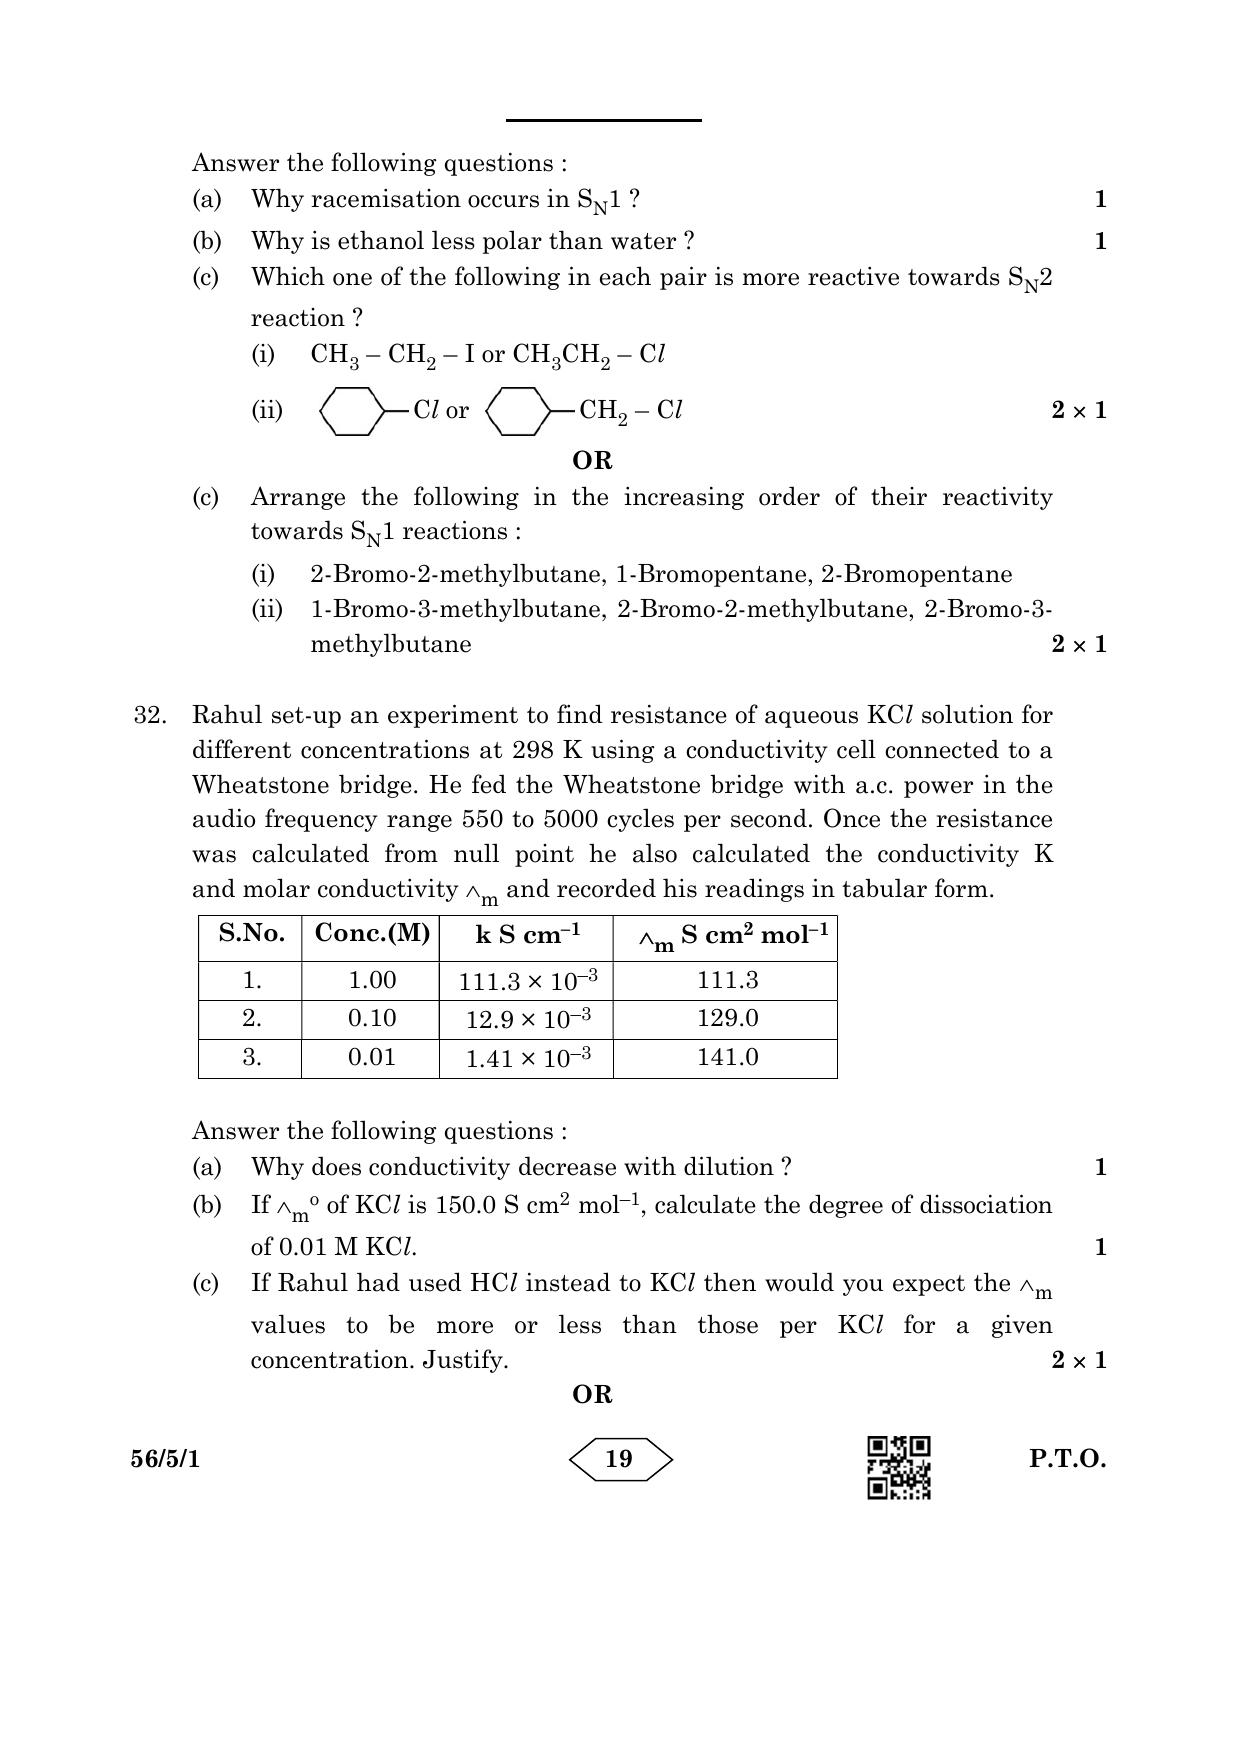 CBSE Class 12 56-5-1 Chemistry 2023 Question Paper - Page 19